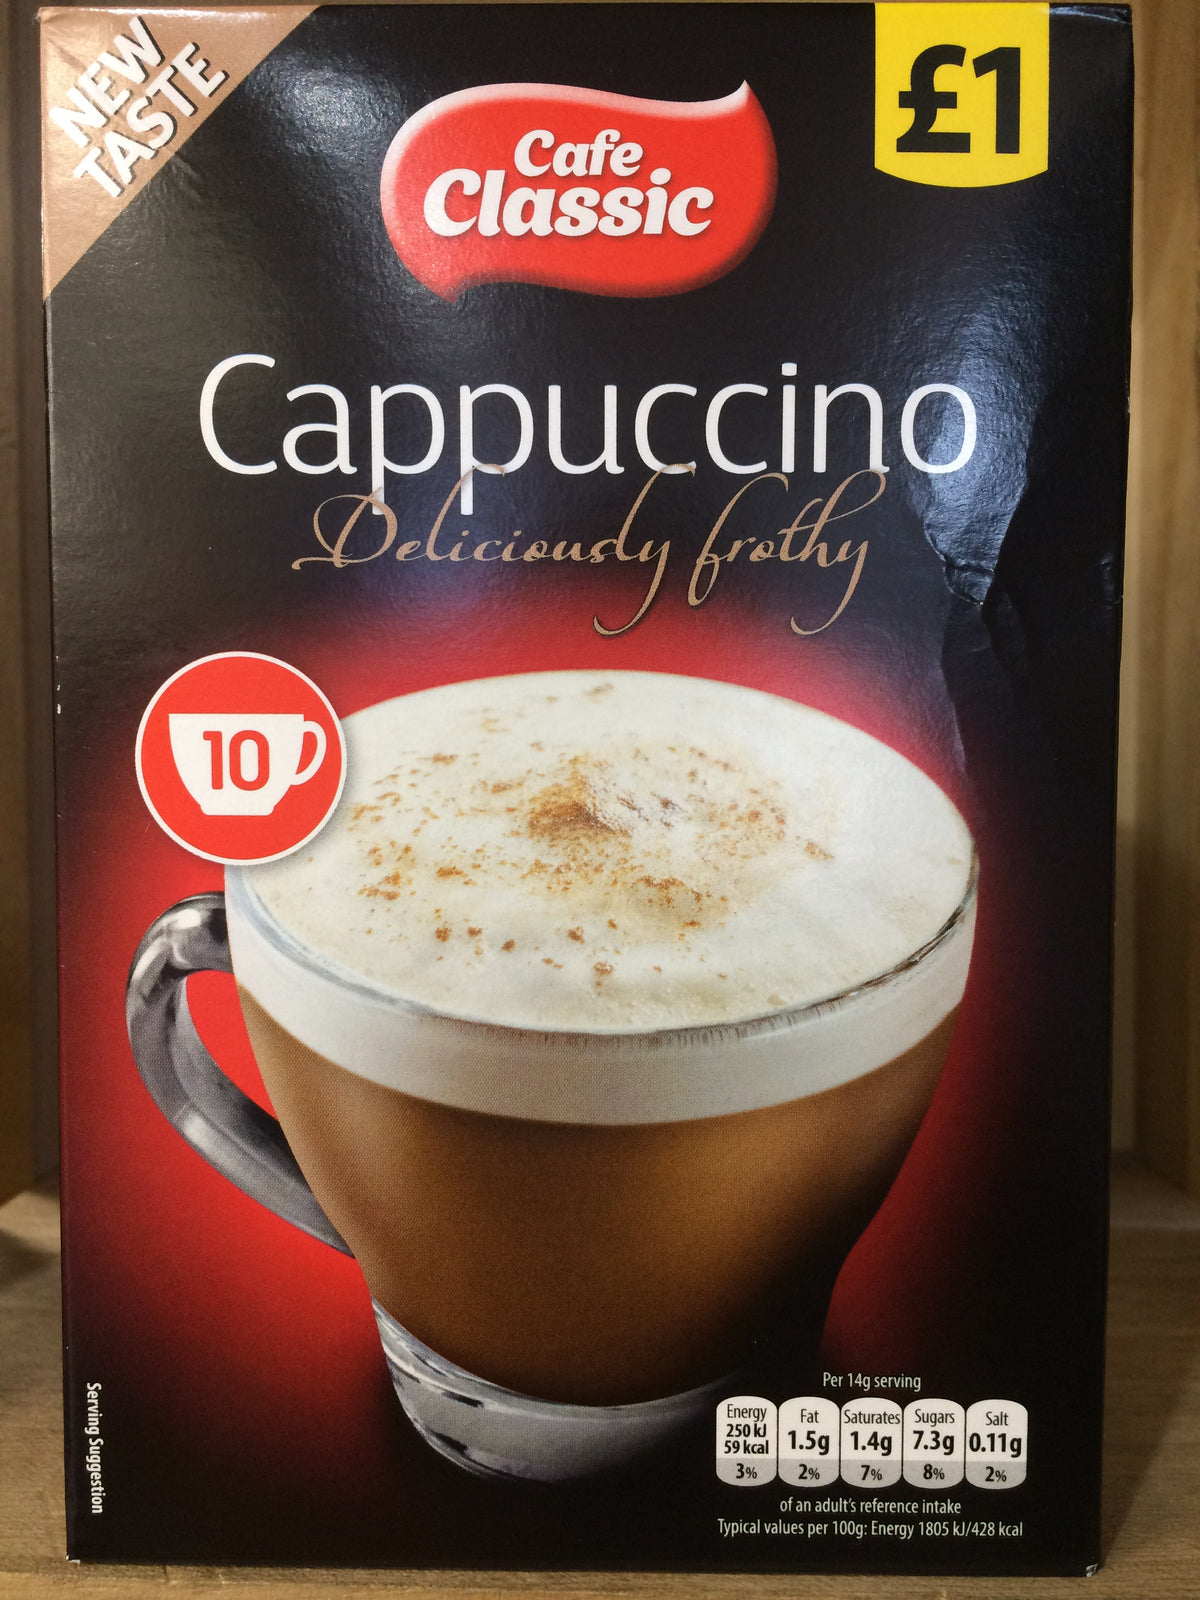 We provide Cafe Classic Cappuccino Sachet Cafe Classic that are of top  quality at competitive rates